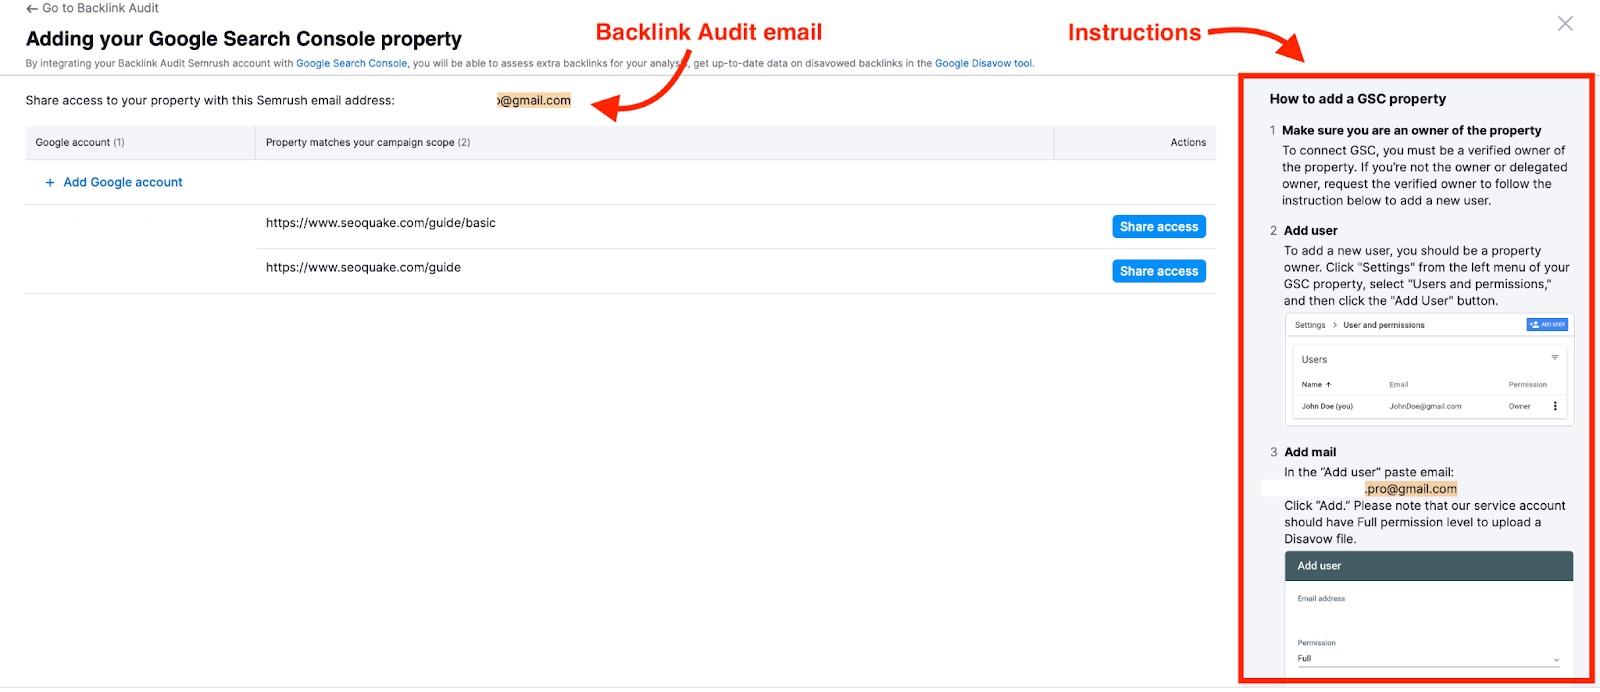 The instructions and Backlink Audit email are highlighted in the window. 